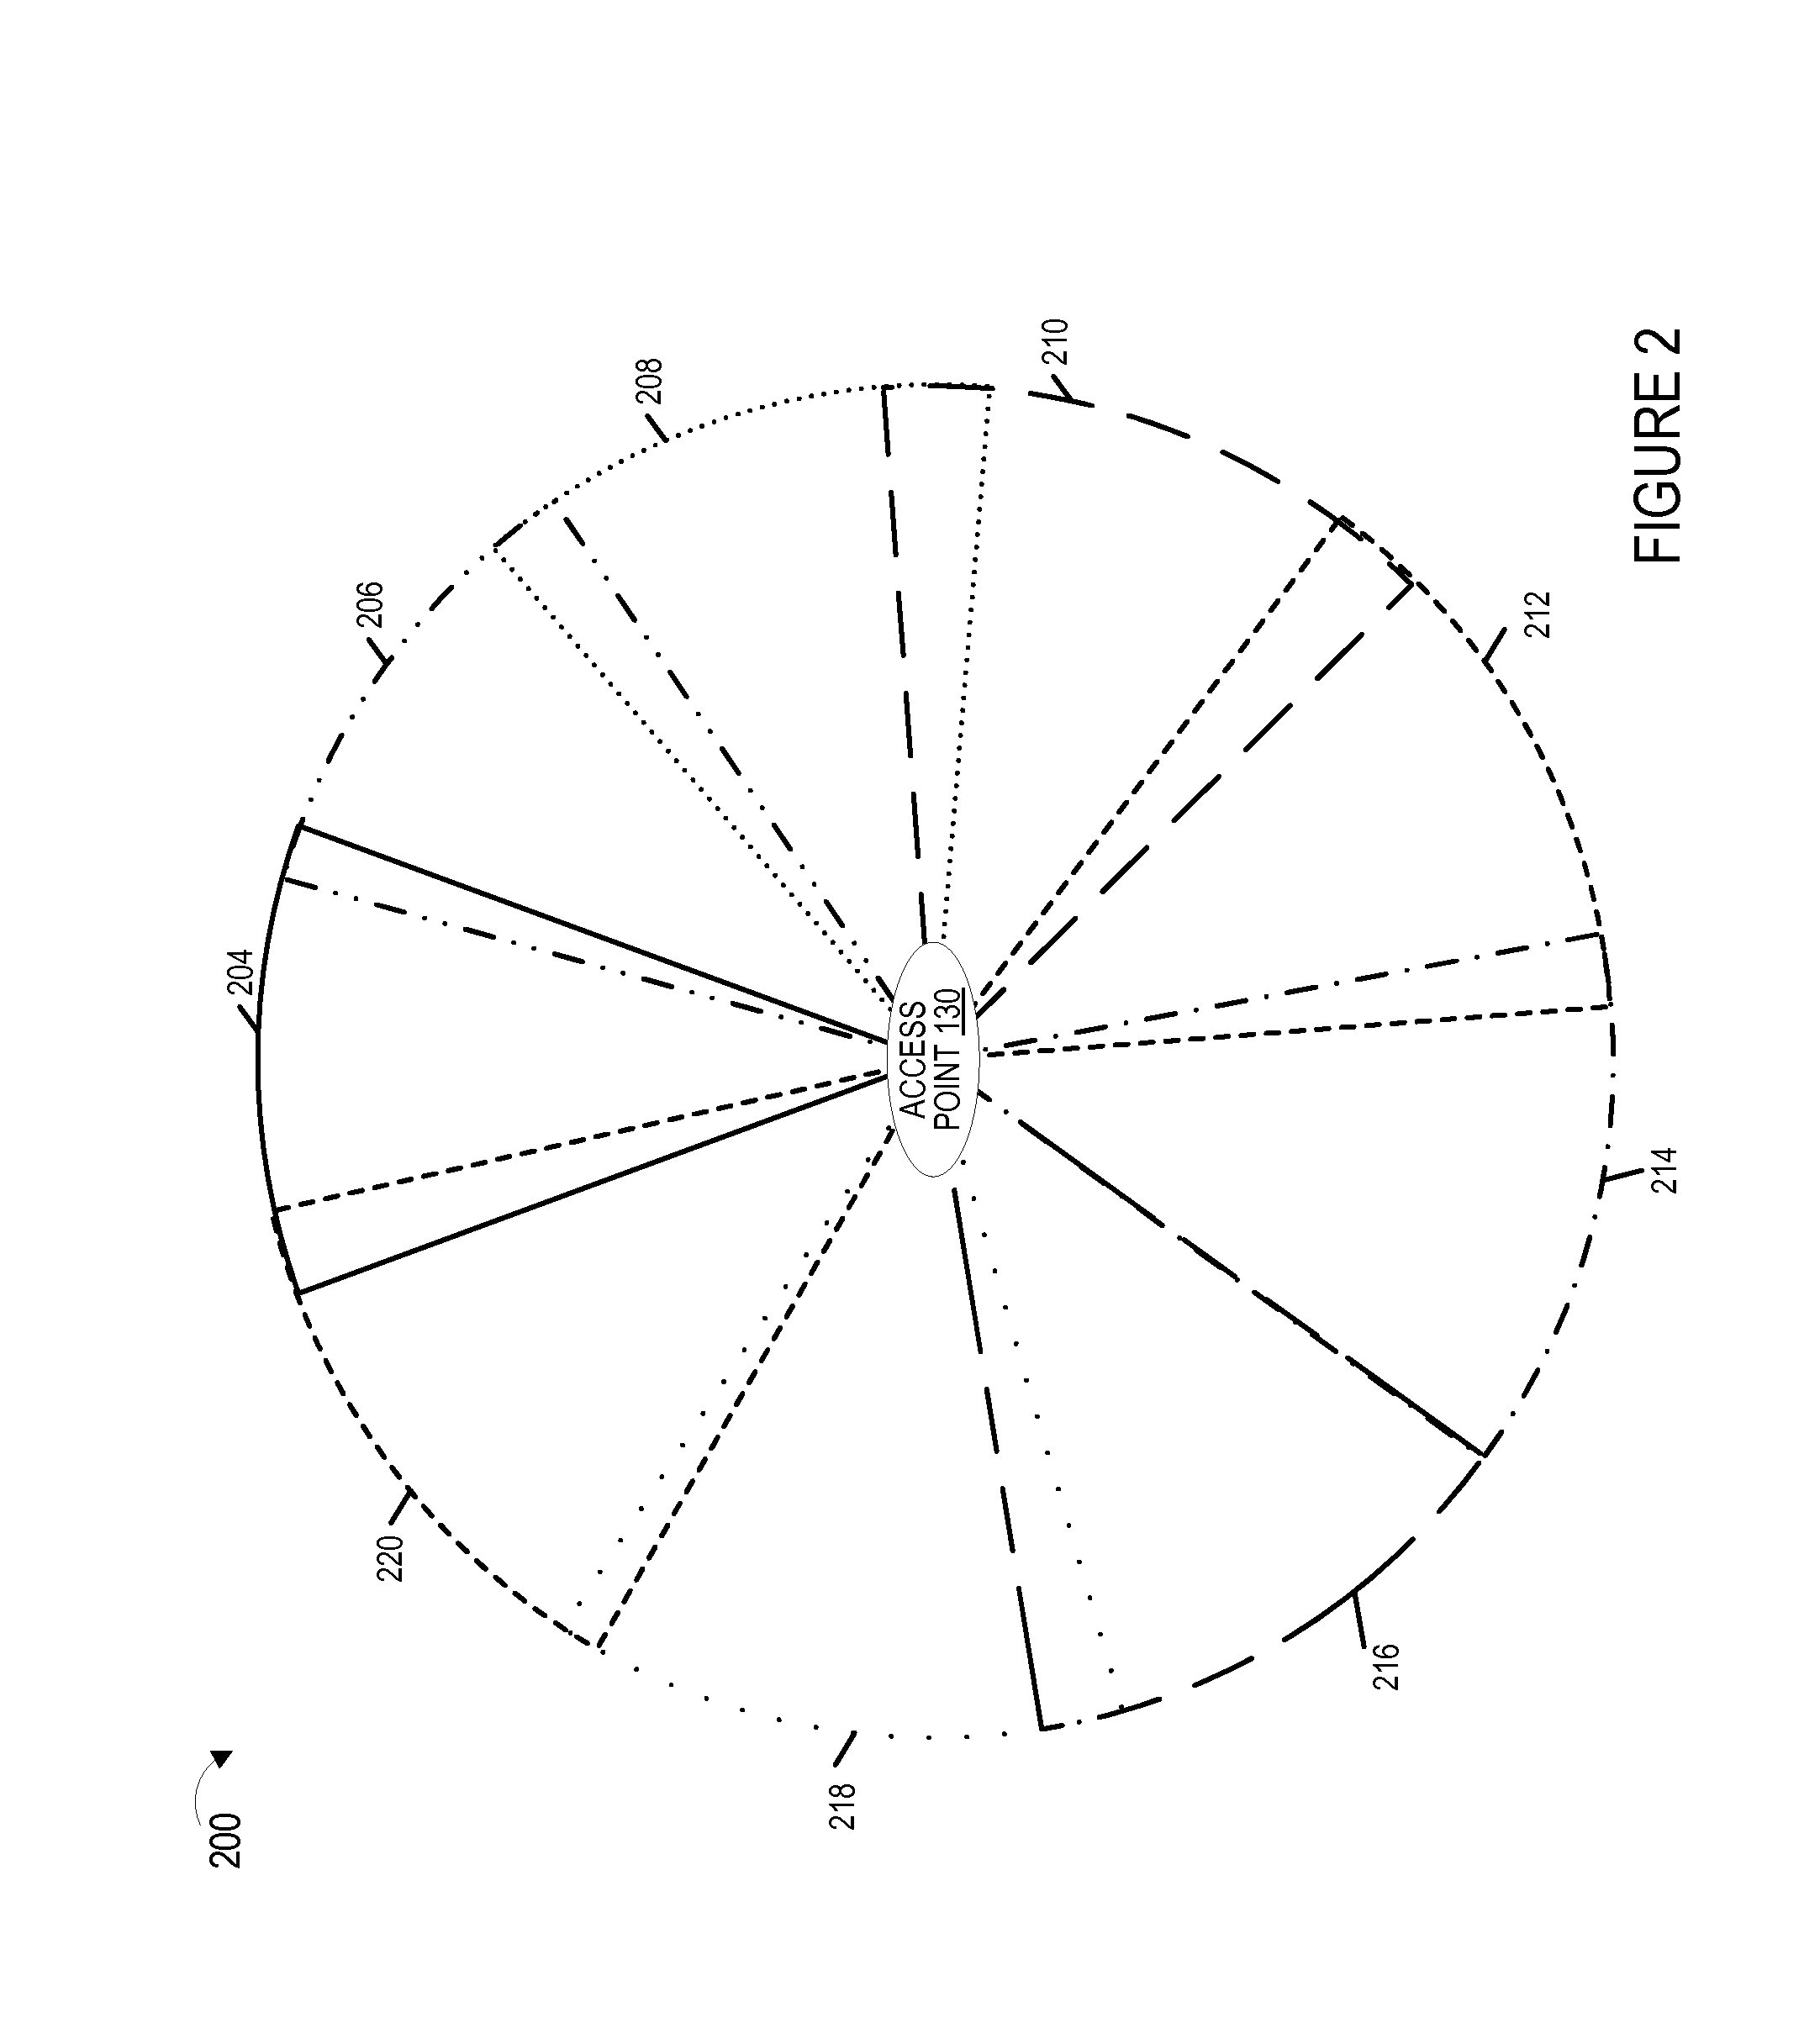 Methods and apparatus for generating,transmitting and/or using beacons